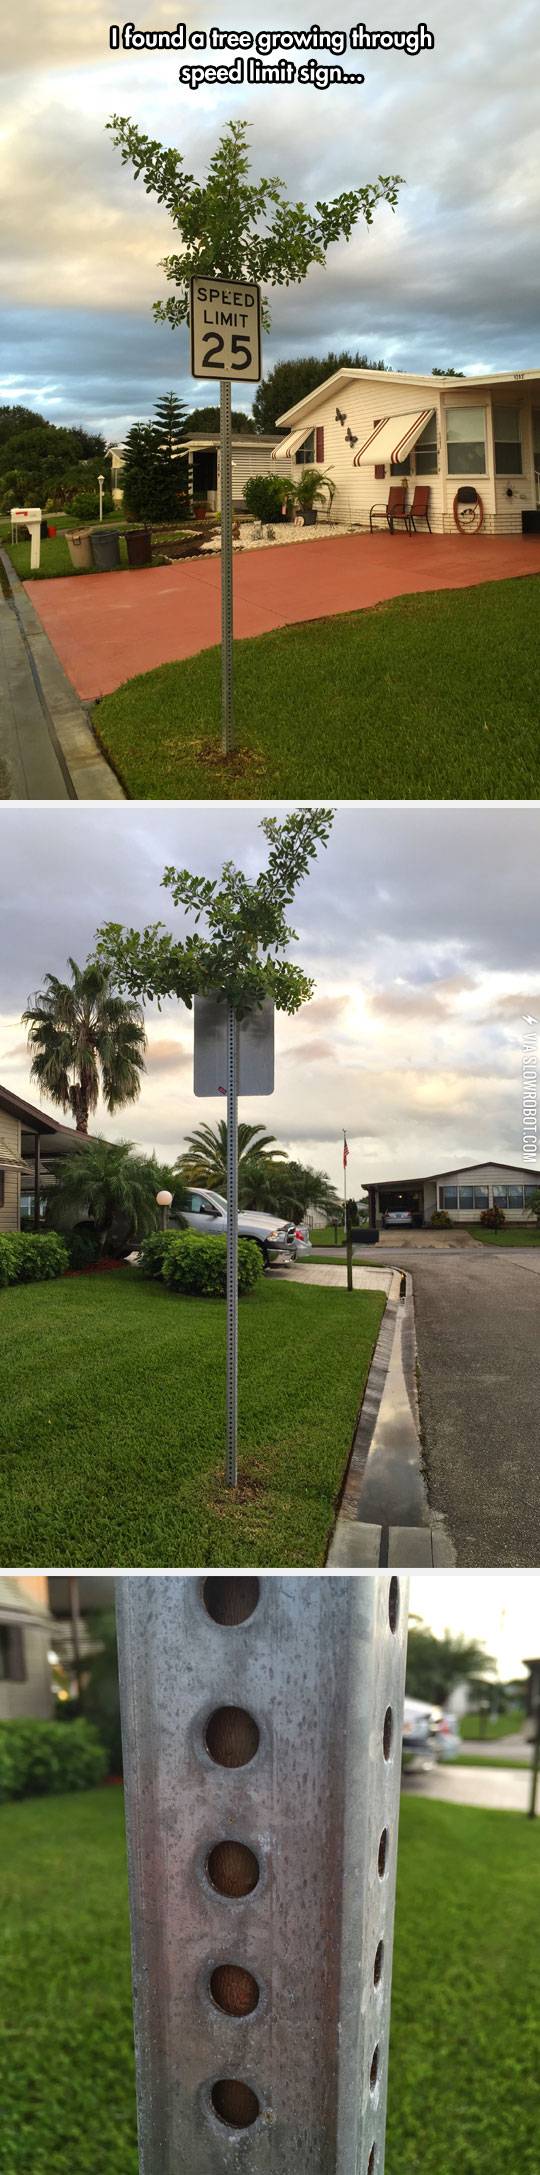 A+tree+growing+through+a+speed+limit+sign.